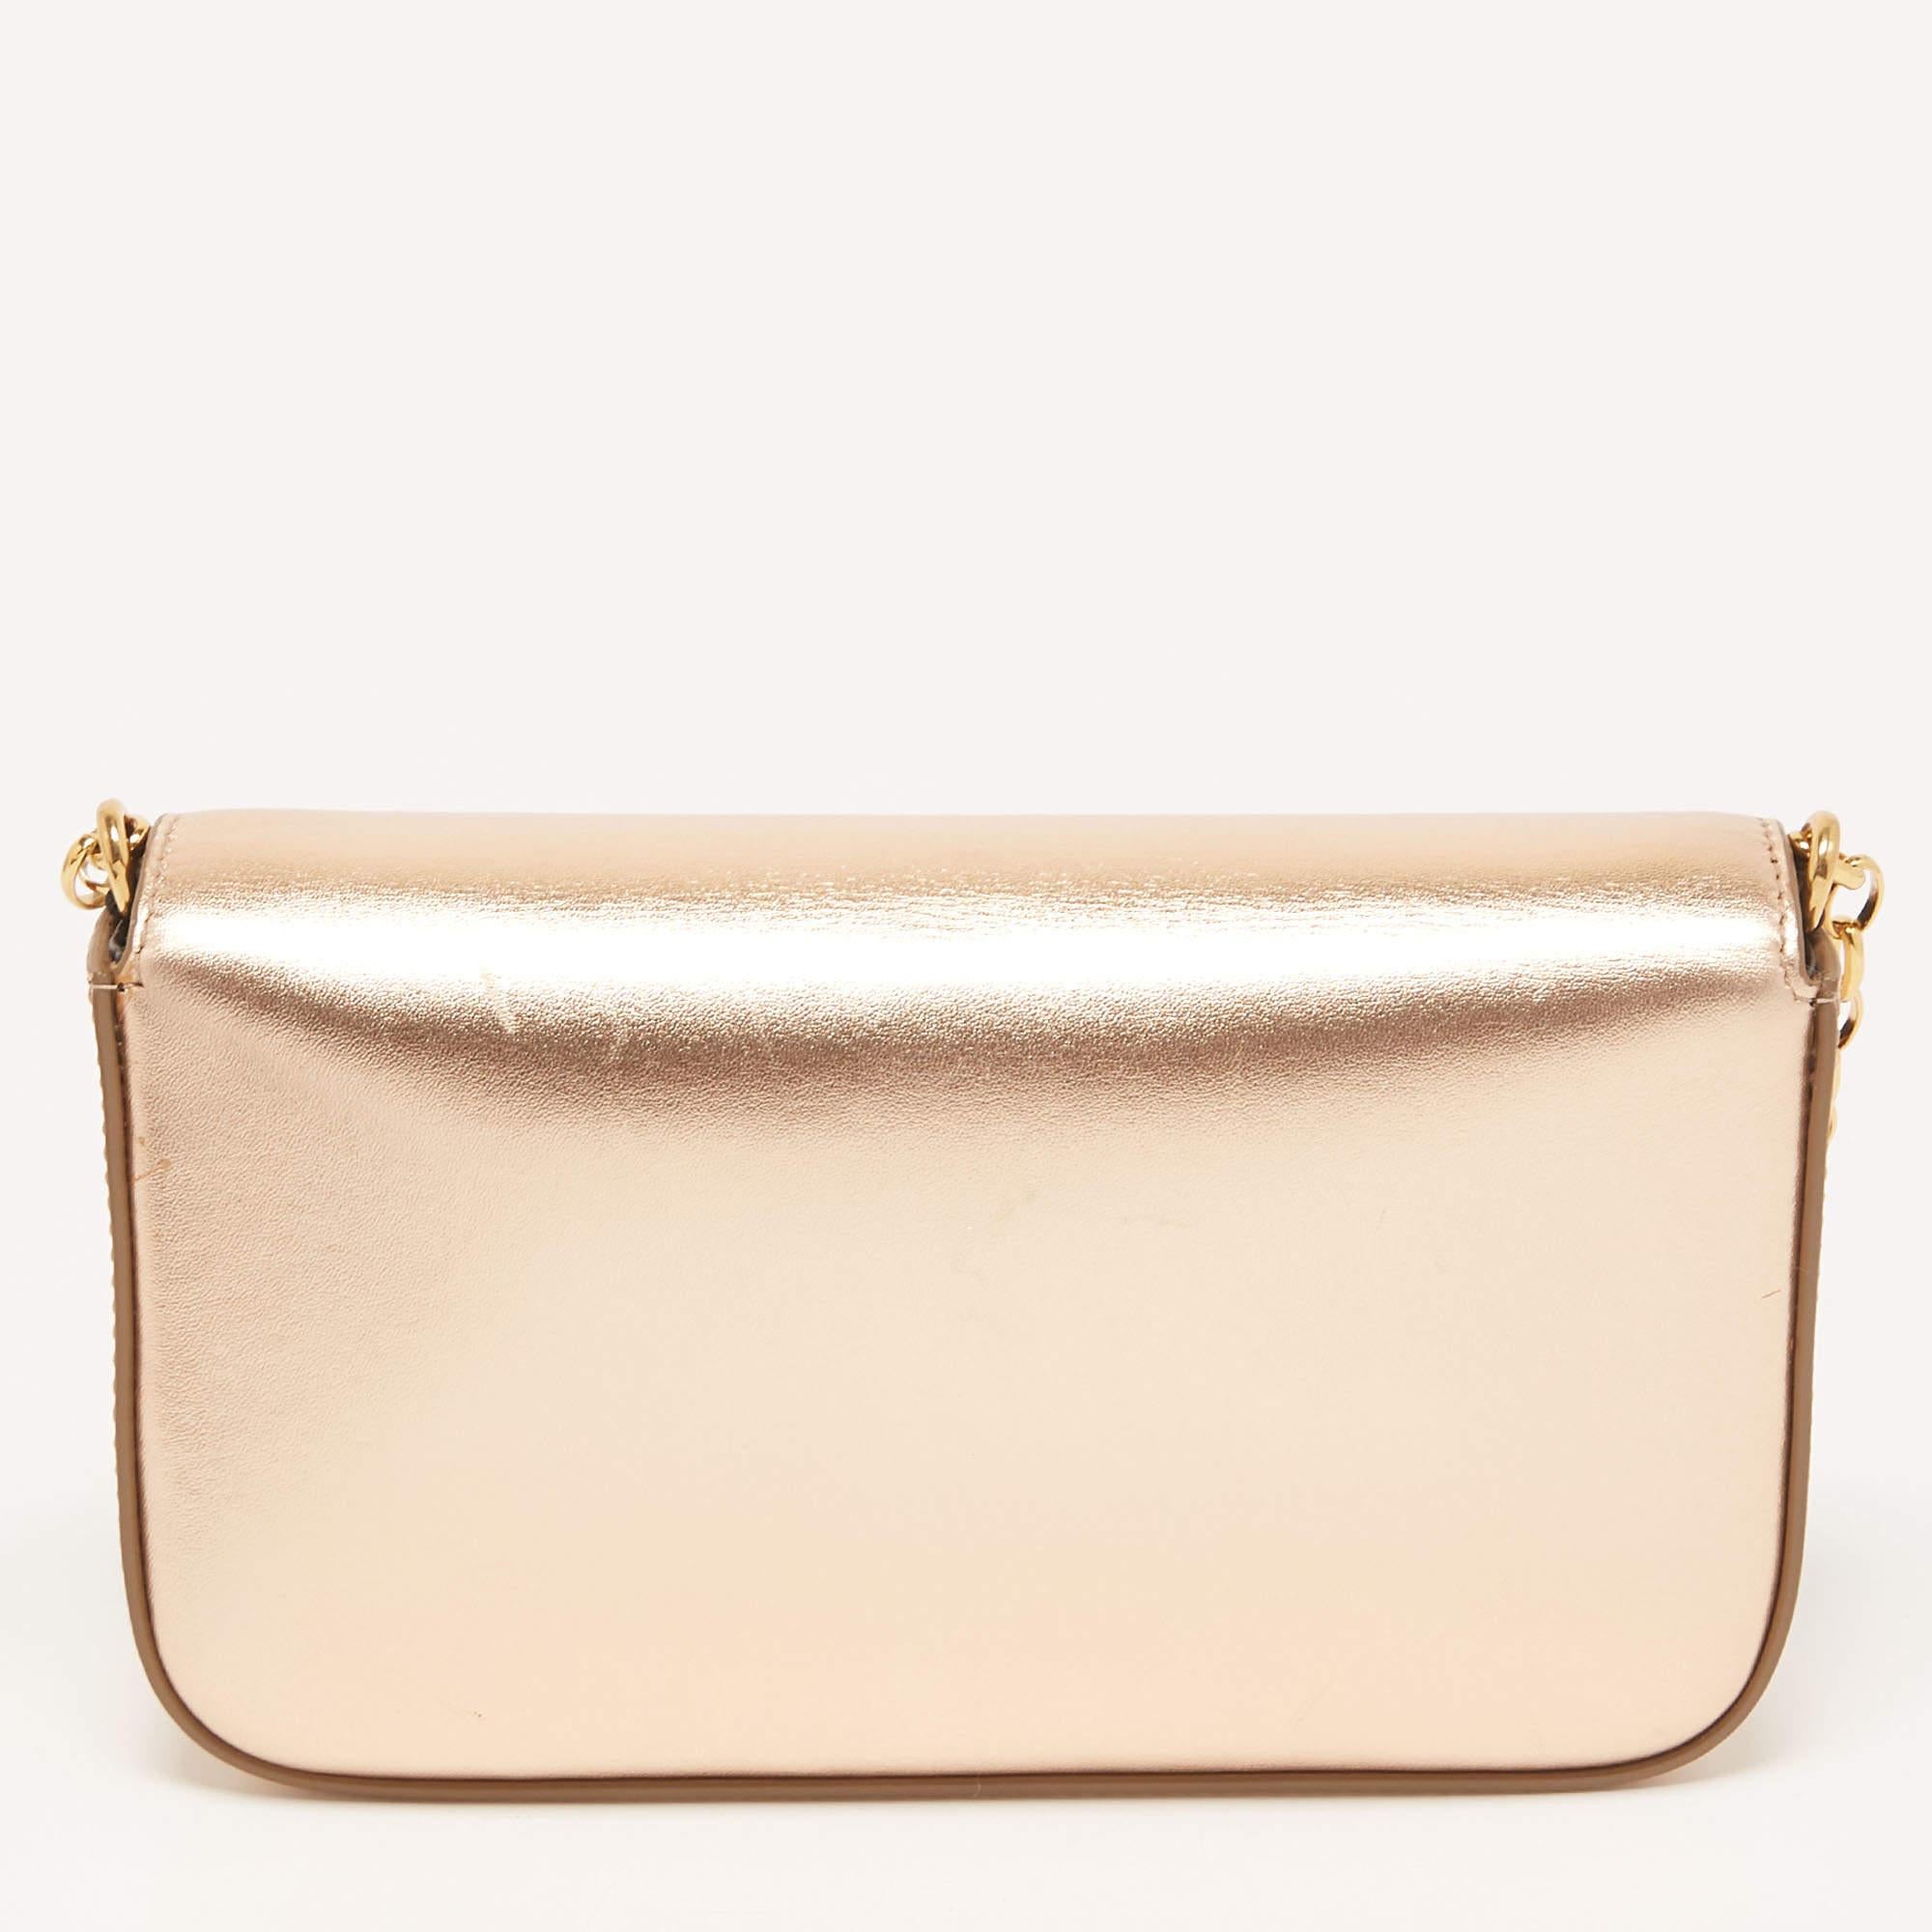 This DG Girls shoulder bag from Dolce & Gabbana is here to end all your fashion woes, as it is striking in appeal and utterly high on style. It has been crafted from gold leather and designed with a flap that has 'D' and 'G' initials. The insides